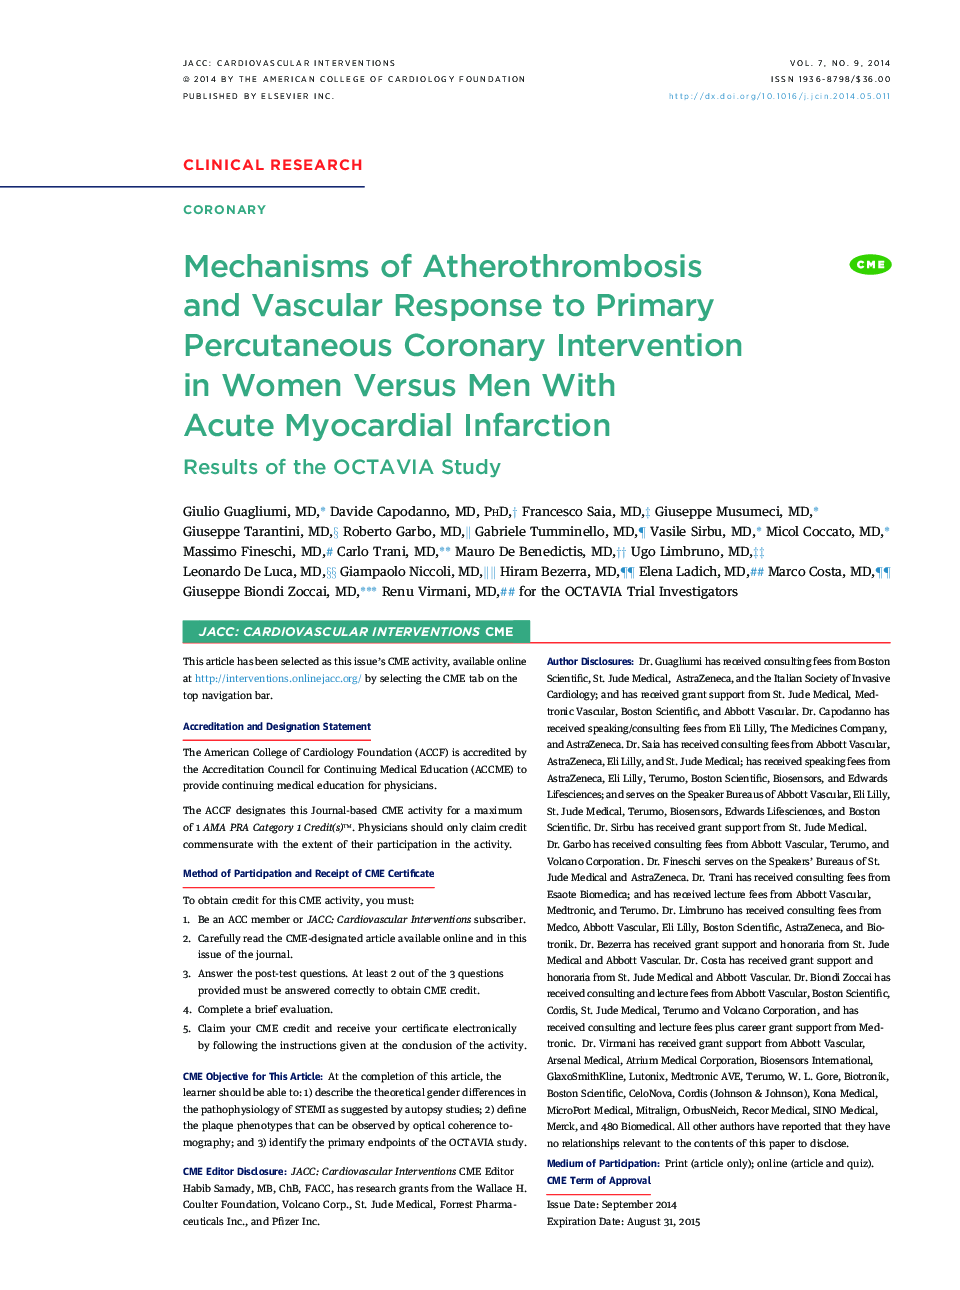 Mechanisms of Atherothrombosis and Vascular Response to Primary Percutaneous Coronary Intervention in Women Versus Men With Acute Myocardial Infarction : Results of the OCTAVIA Study